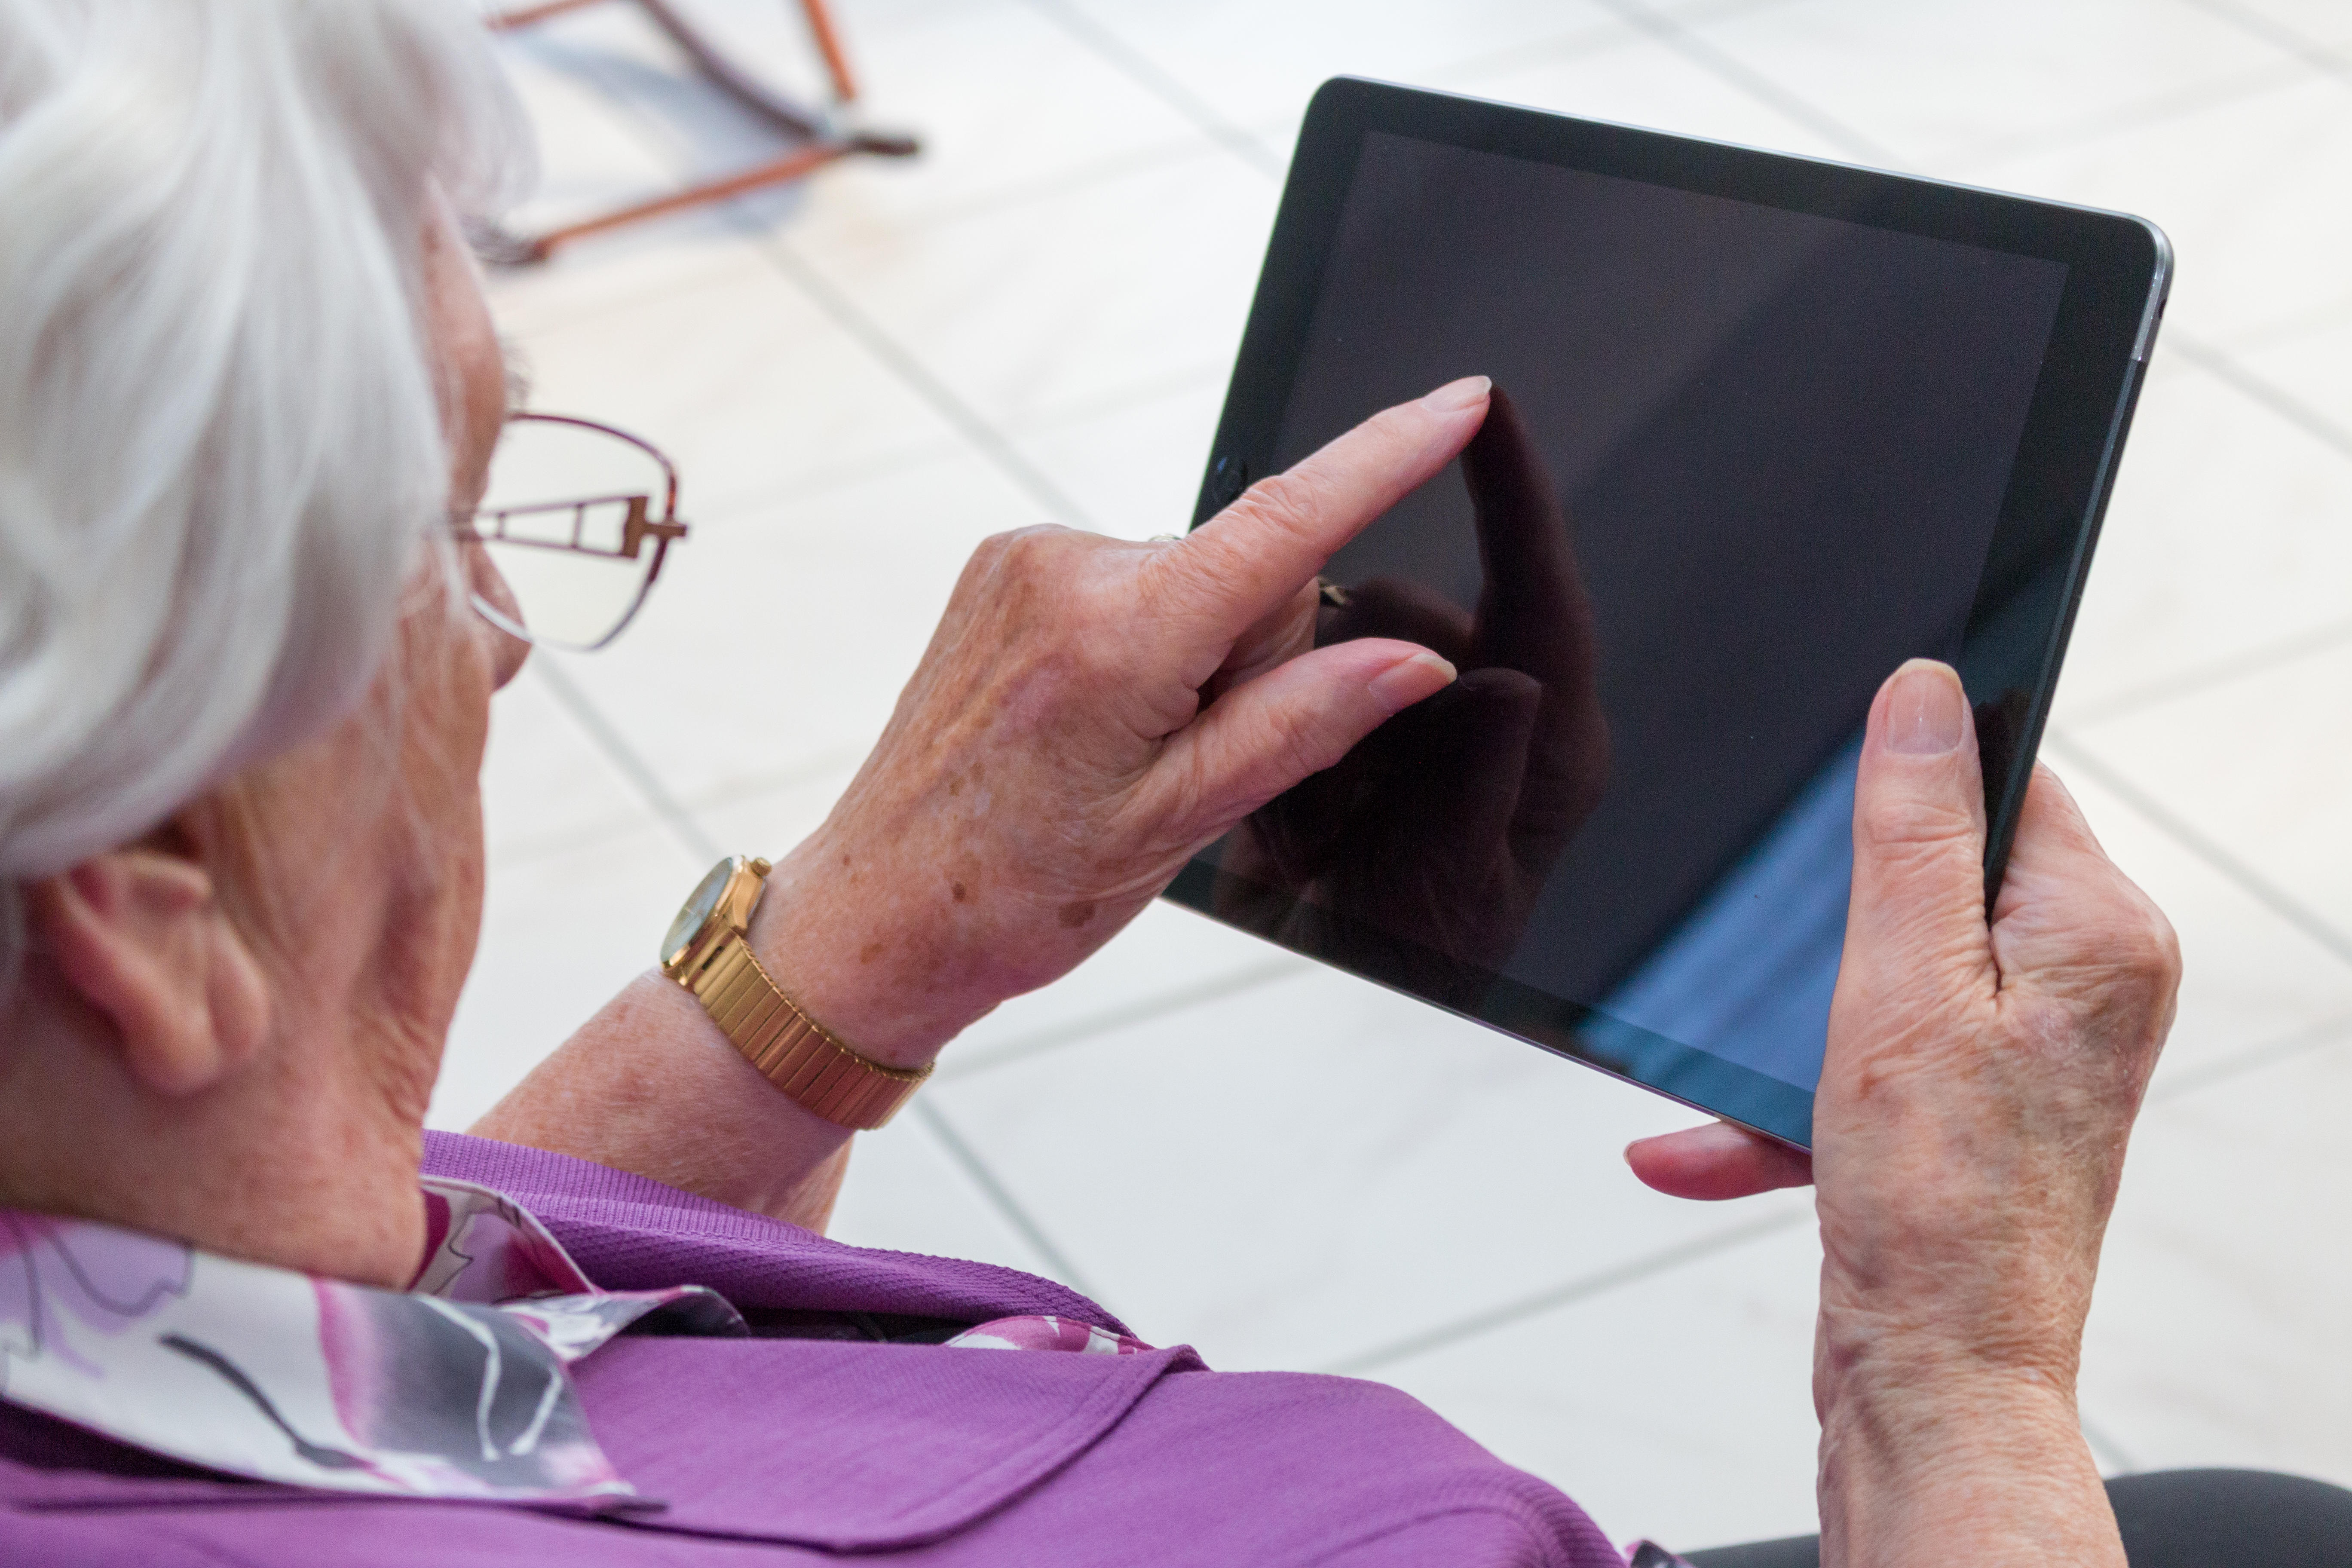 95-year-old woman sitting in the living room typing on a mobile device or iPad